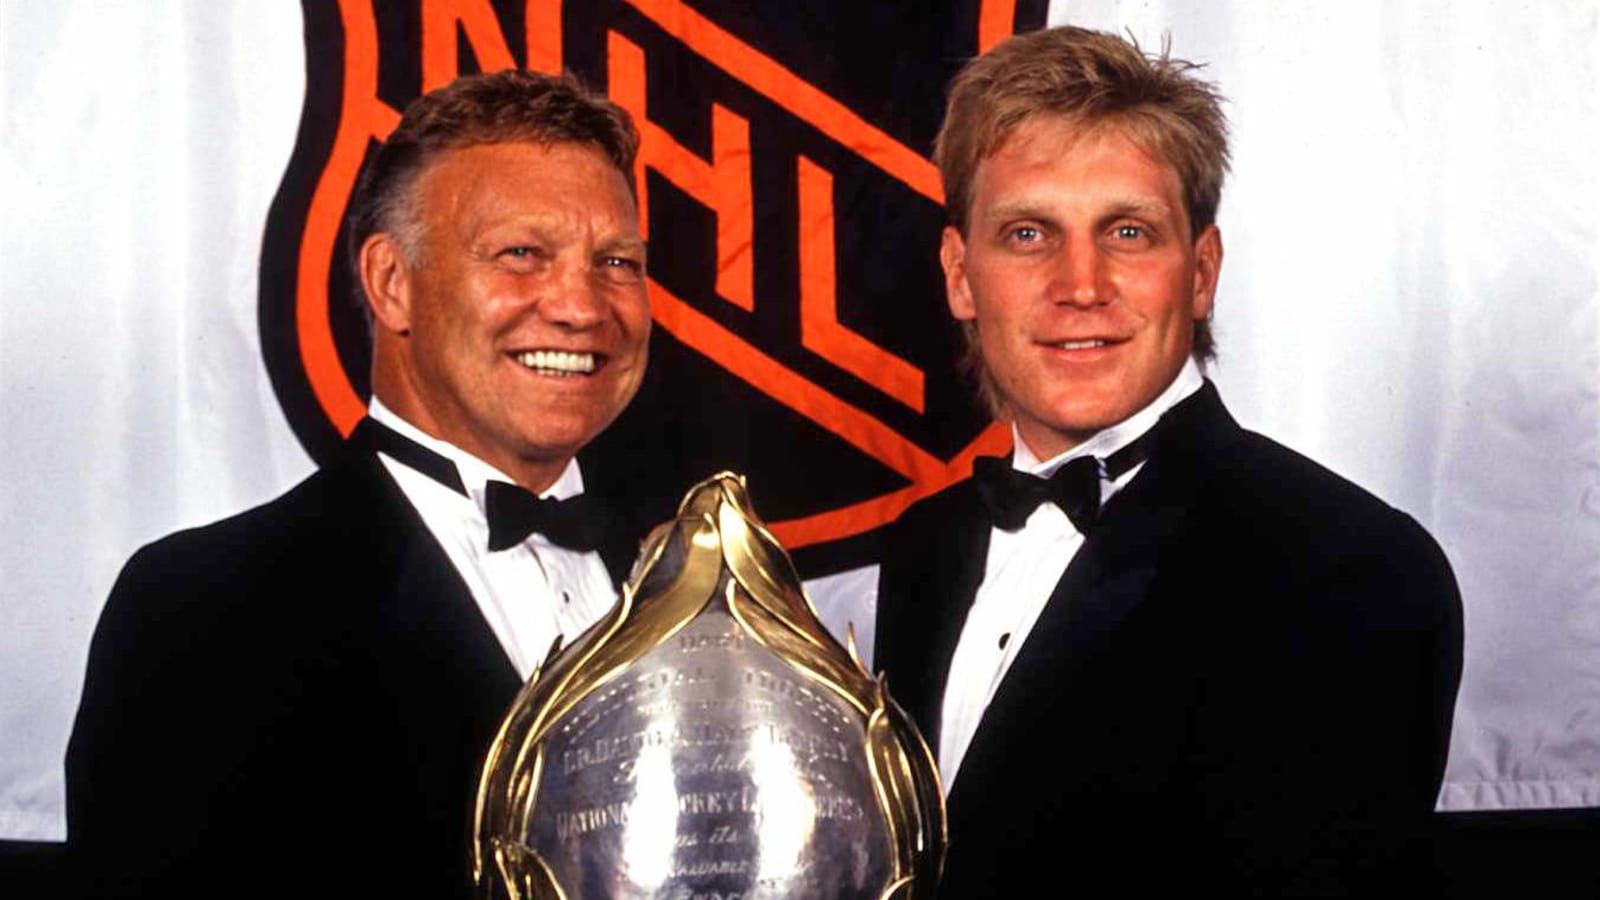 The '50-goal scorers in the NHL since 1989-90' quiz